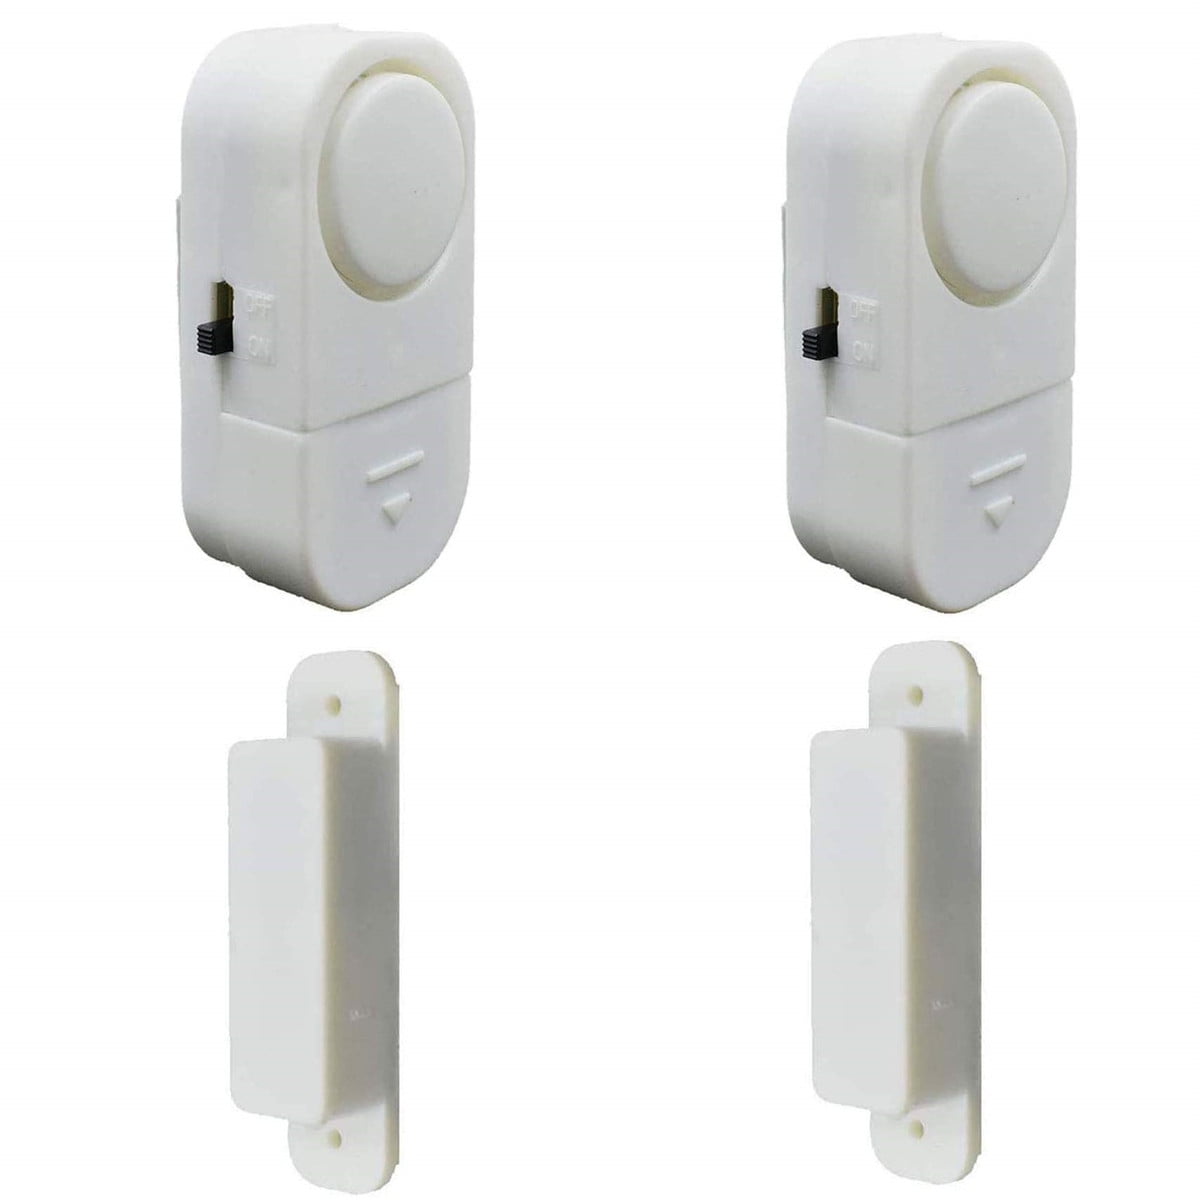 Keep Your Kids or Dementia Patients Safe DIY Easy Installation 120 DB Loud Door and Window Alarm 2 Pack with Battery Operated for Home RV Pool Cabinet